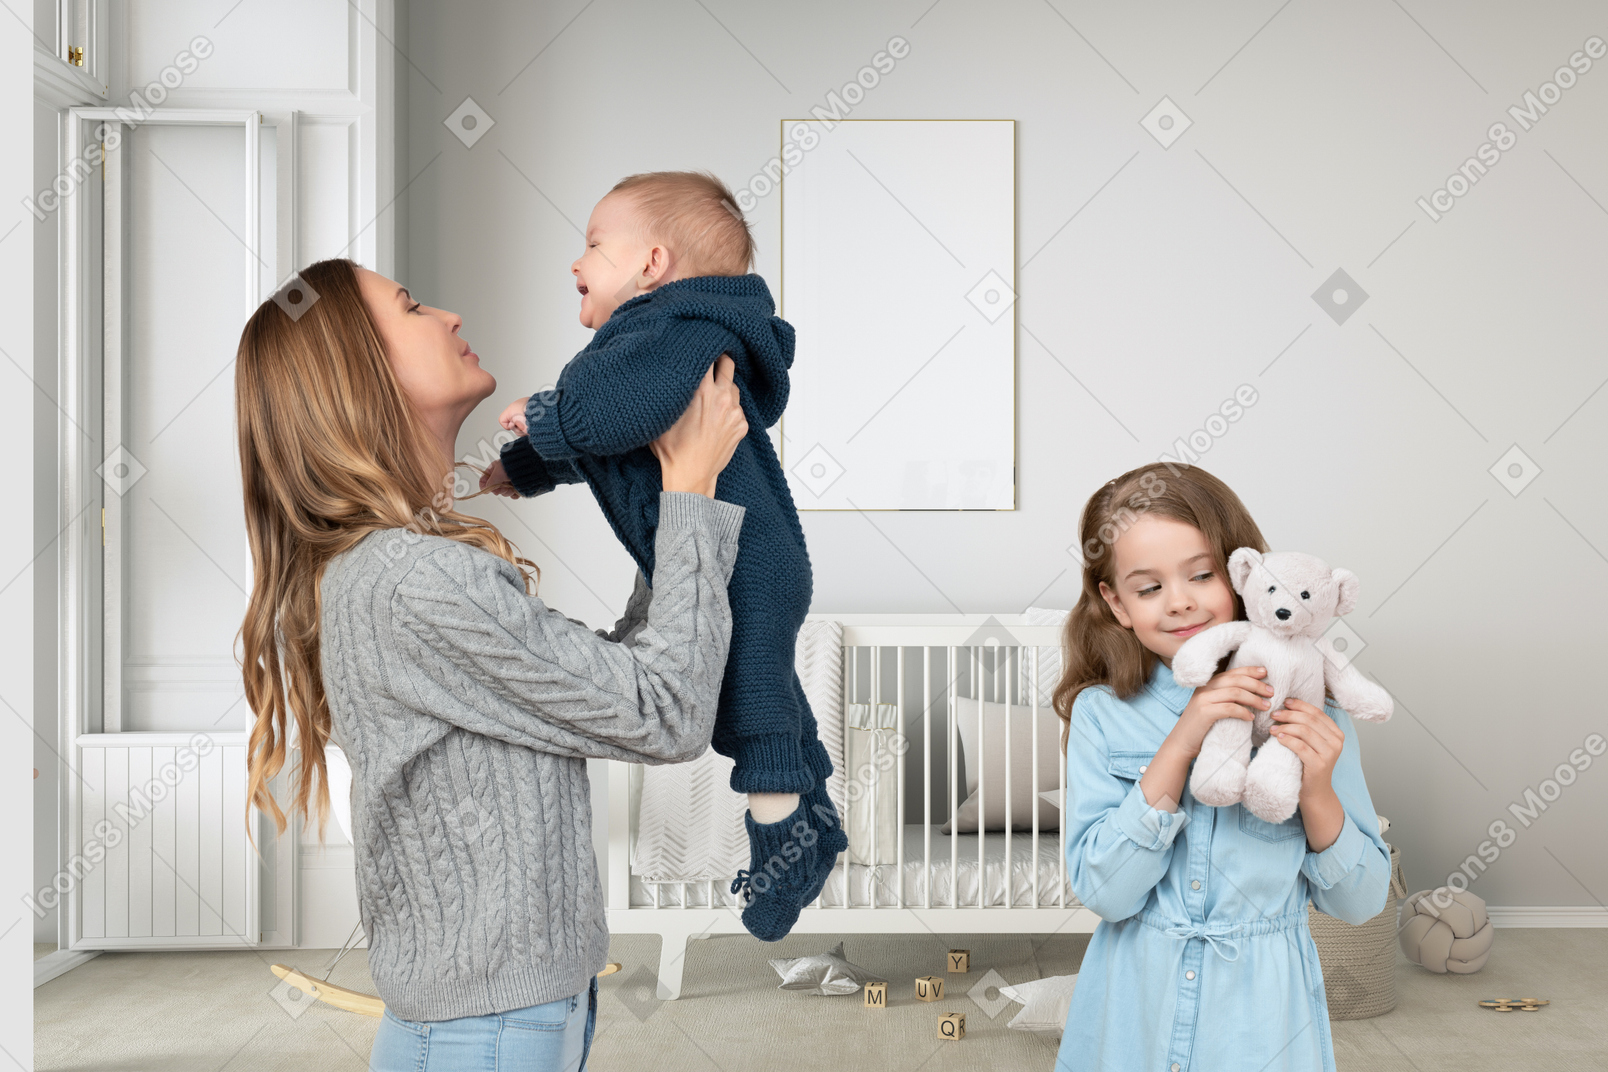 Woman holding a baby up next to little girl